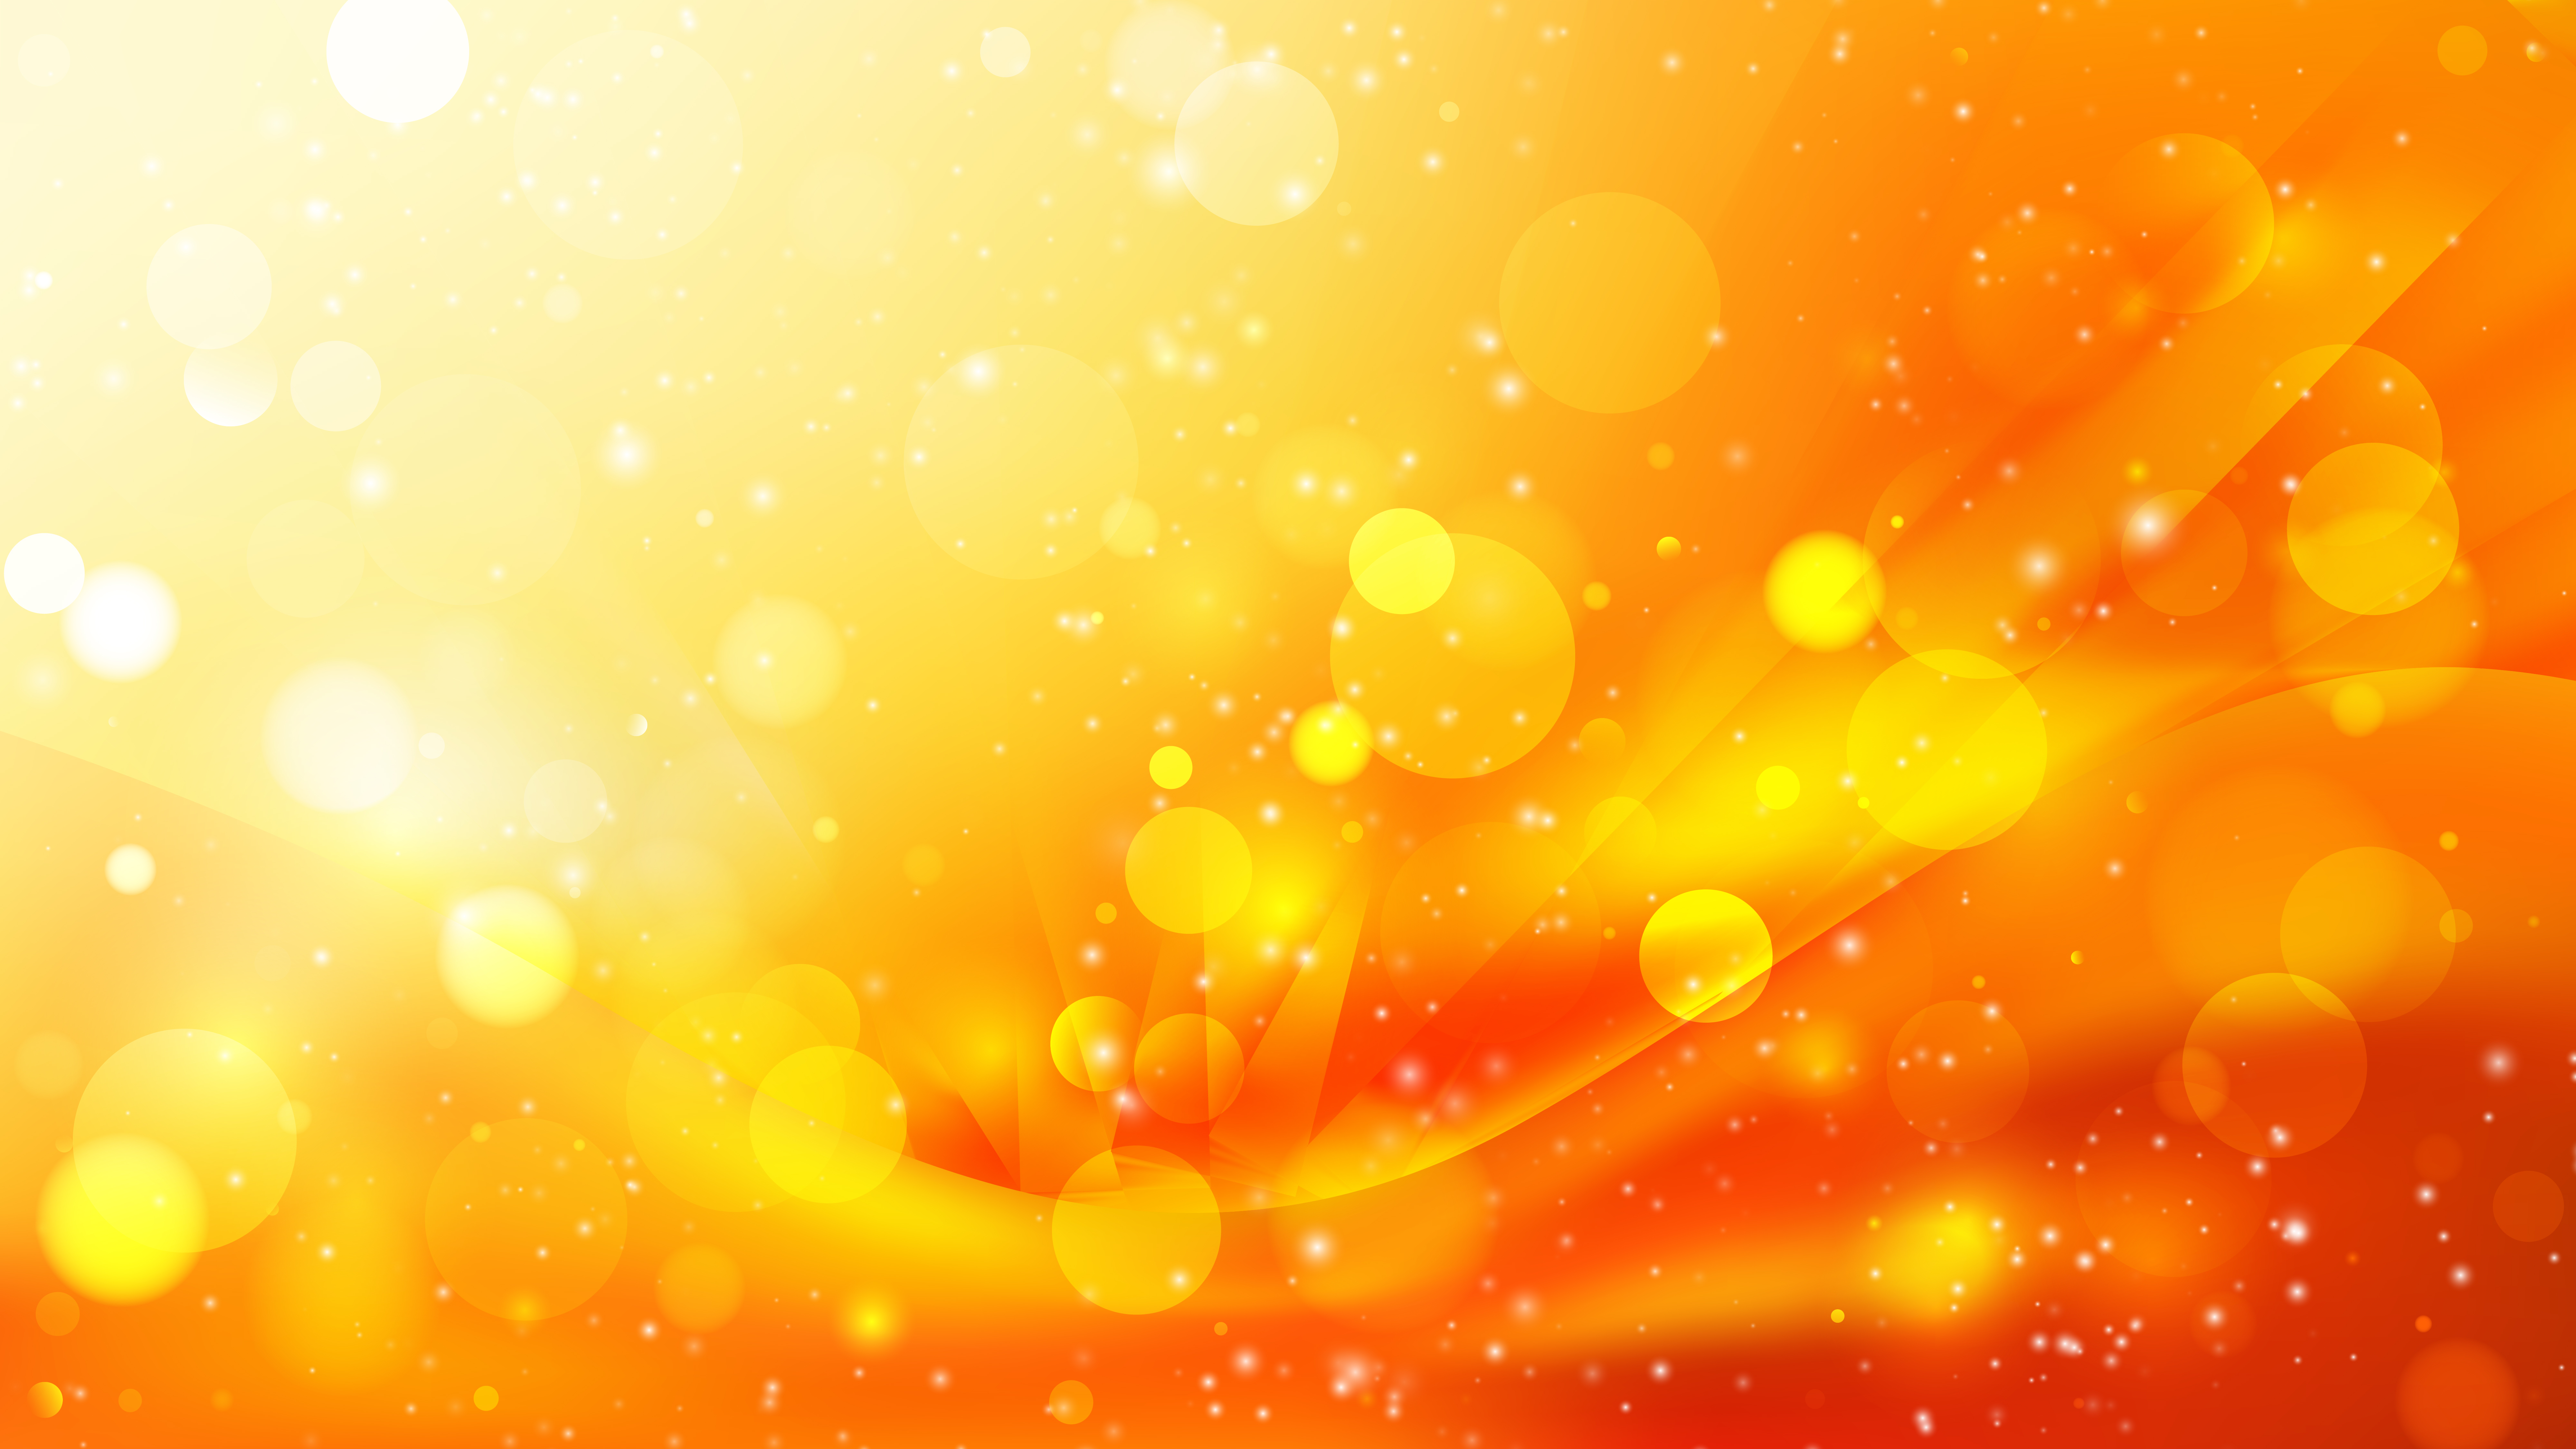 Free Abstract Orange And Yellow Lights Background Design